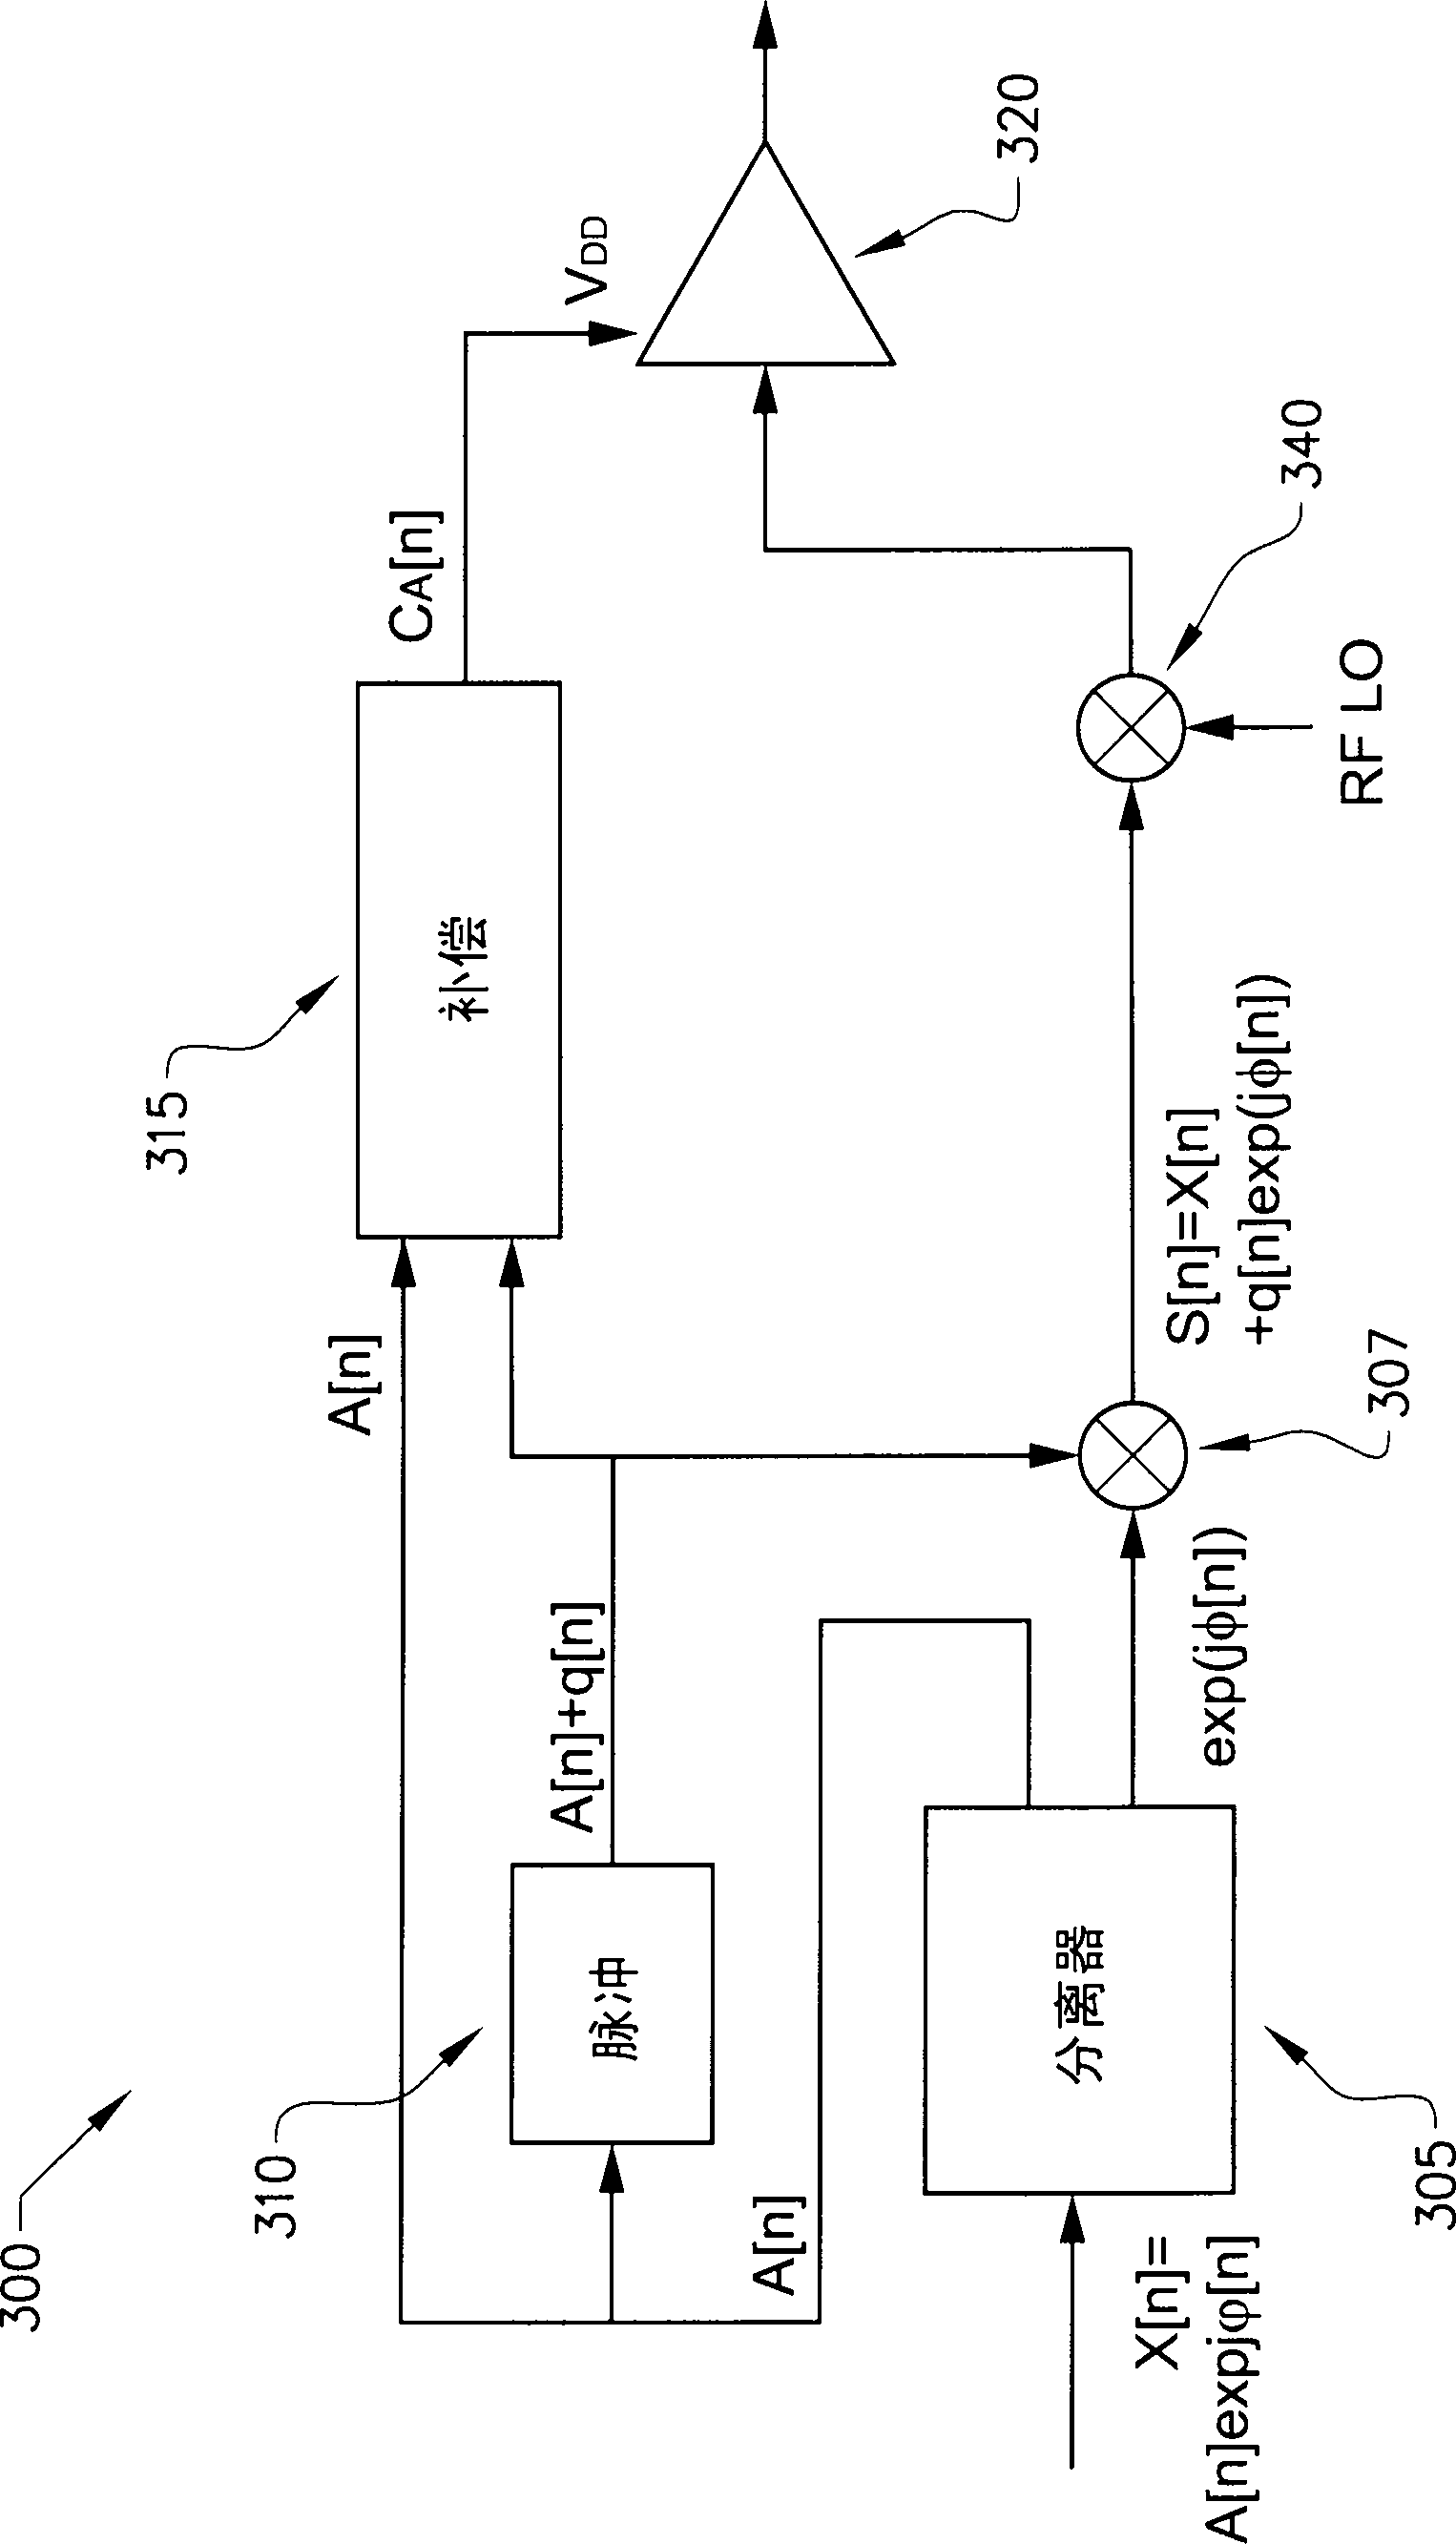 Transmitter with quantization noise compensation